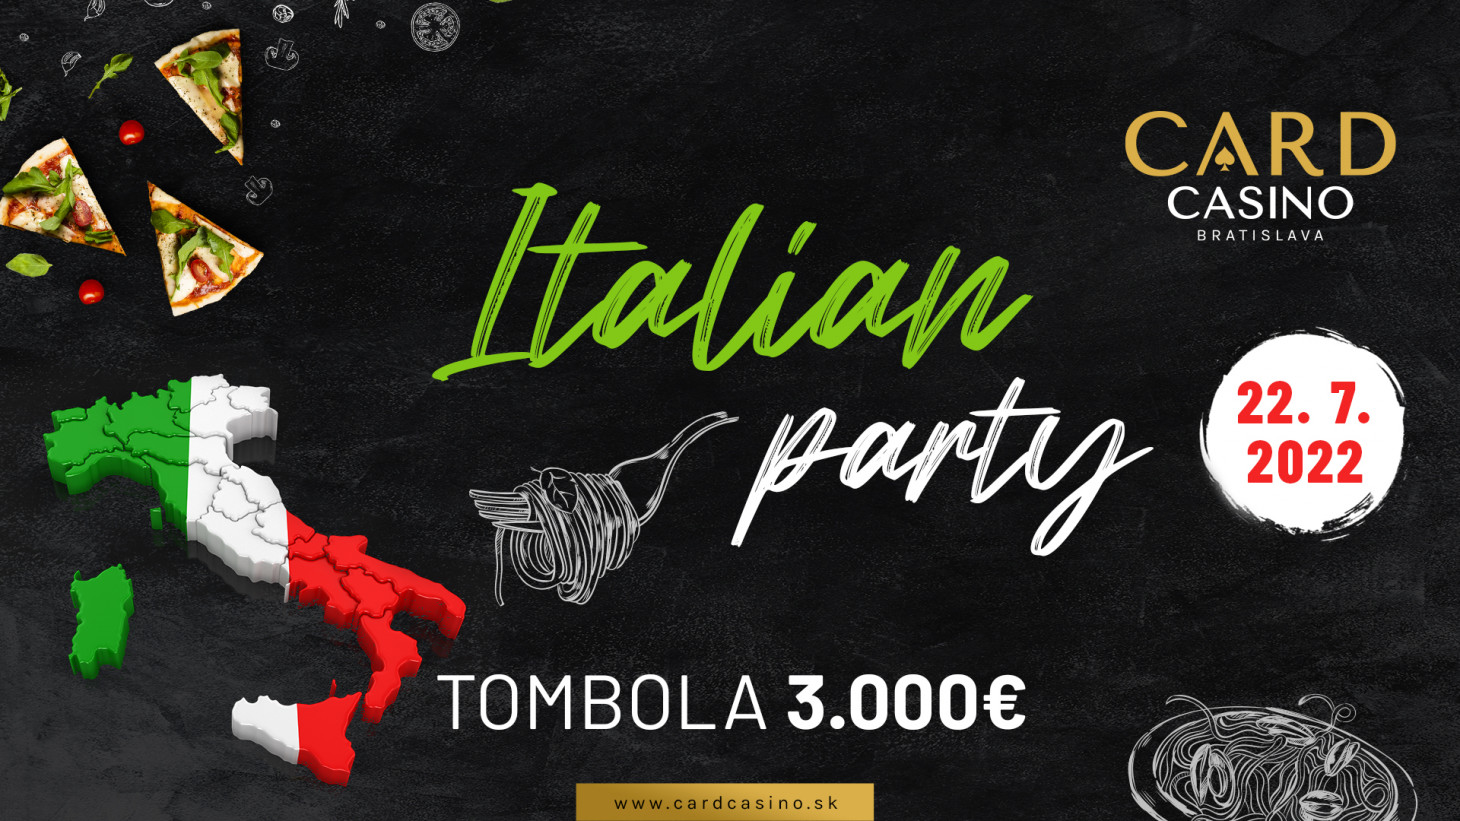 Fun, good food and a rich TOMBOLA. Enjoy an Italian party at the casino